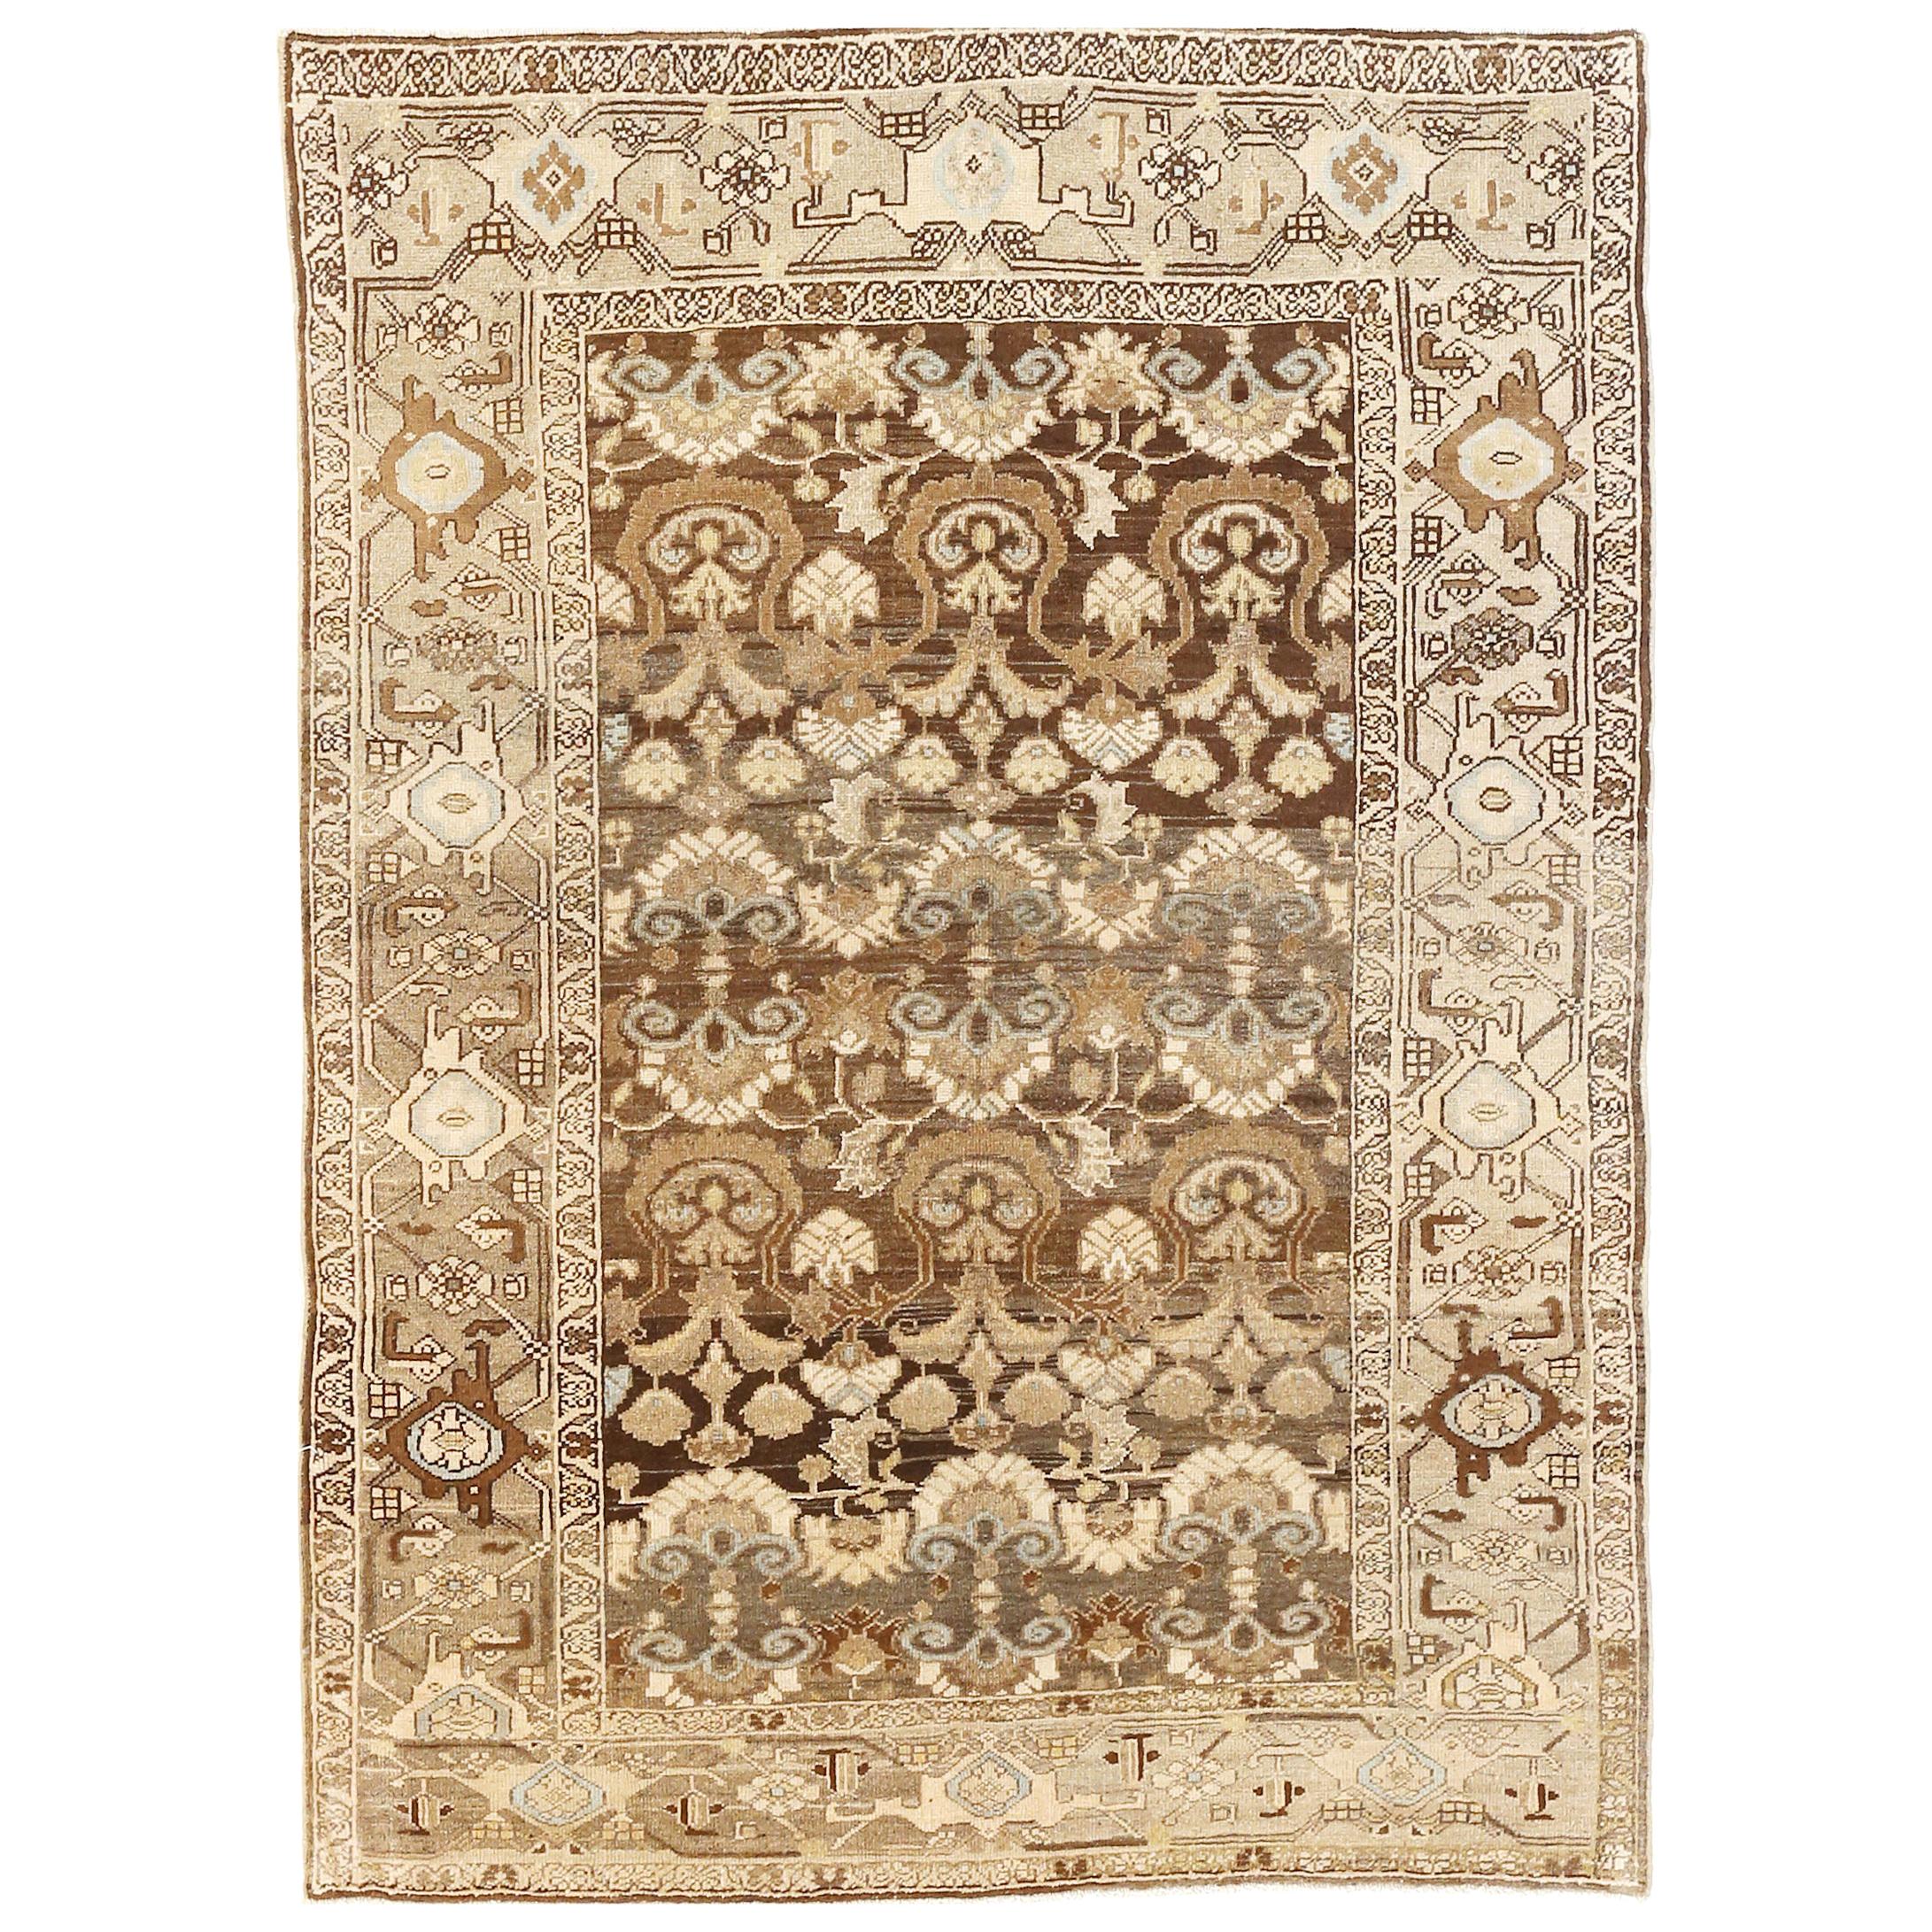 Antique Persian Gholtogh Rug with Brown & Beige Botanical Details on Ivory Field